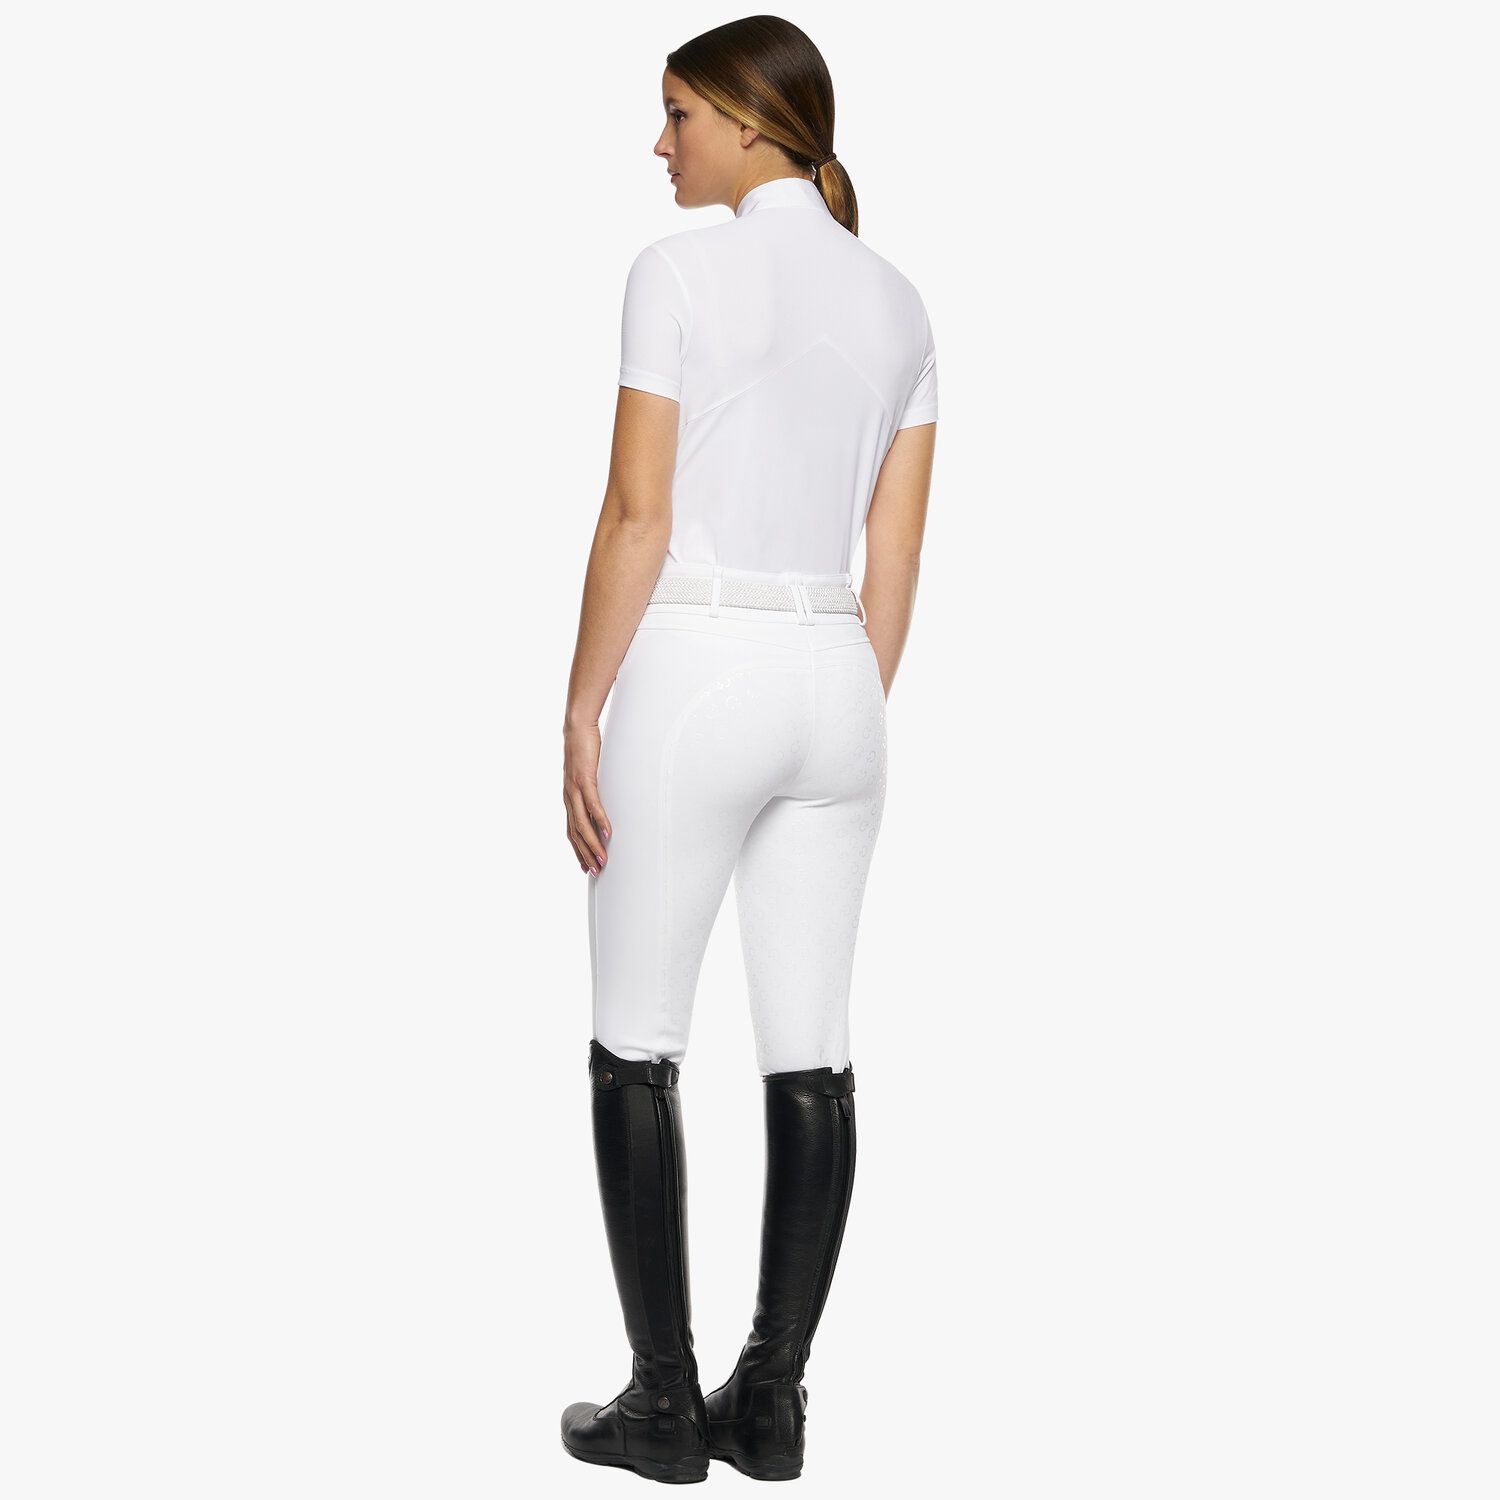 Cavalleria Toscana Women’s performance jersey show shirt with a zip WHITE-3